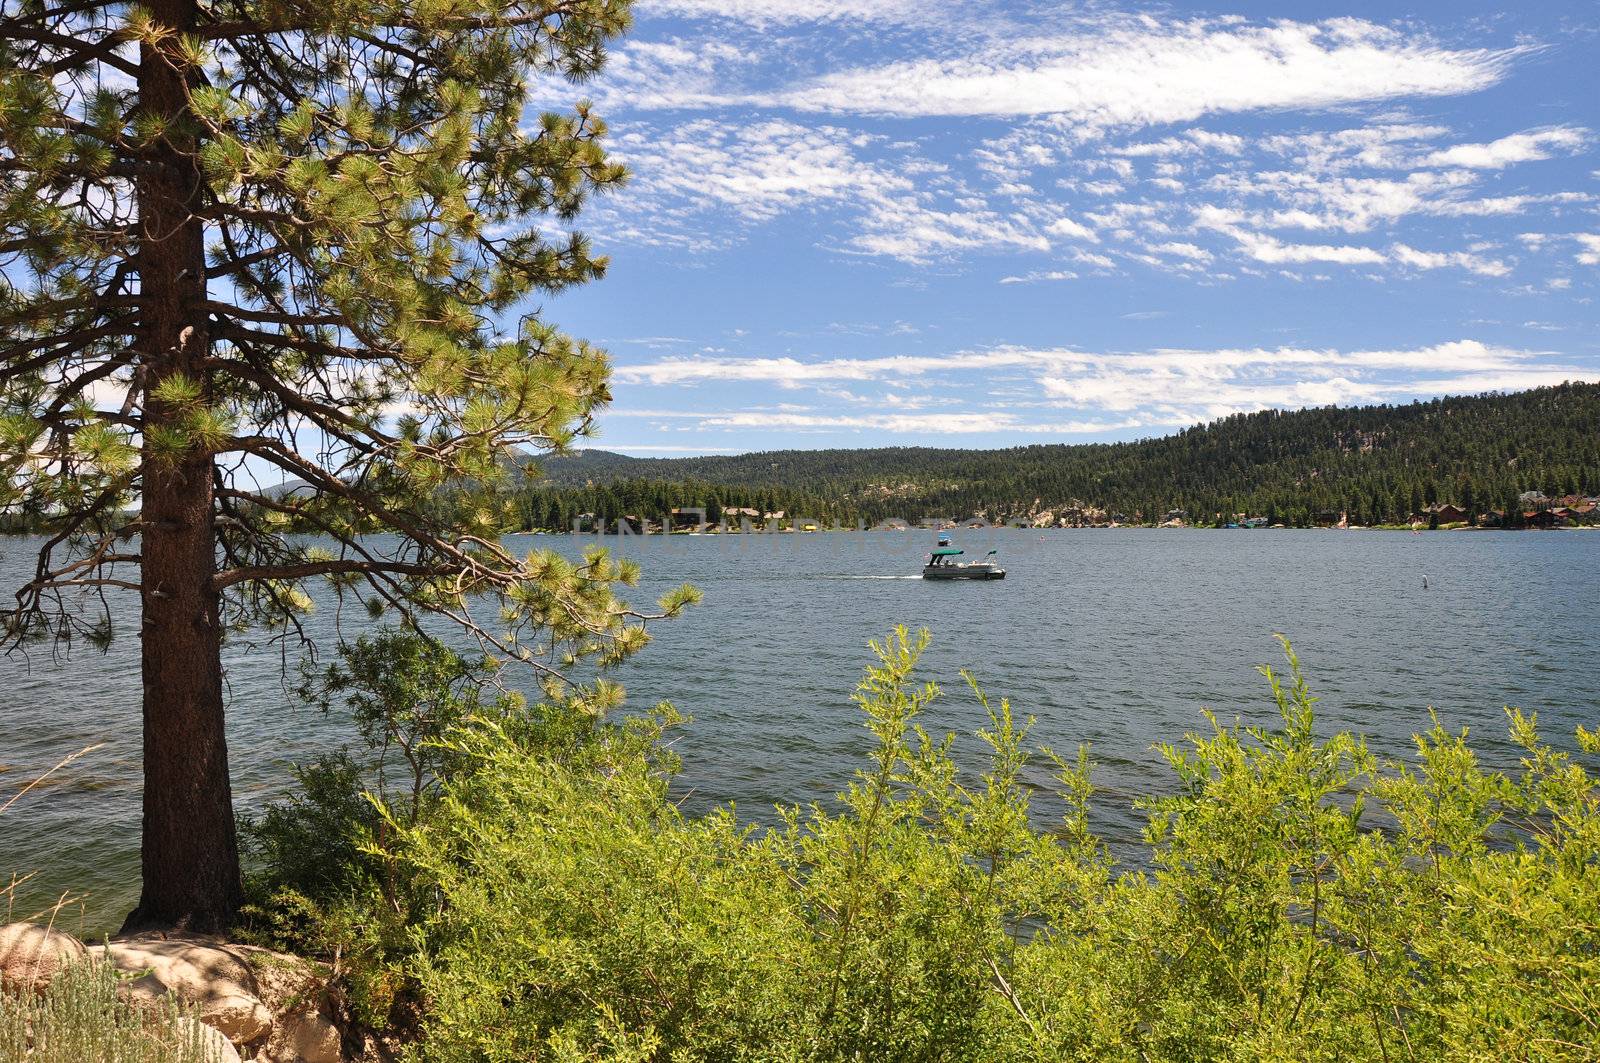 A lone boat makes its way across Big Bear Lake in the Southern California mountains.